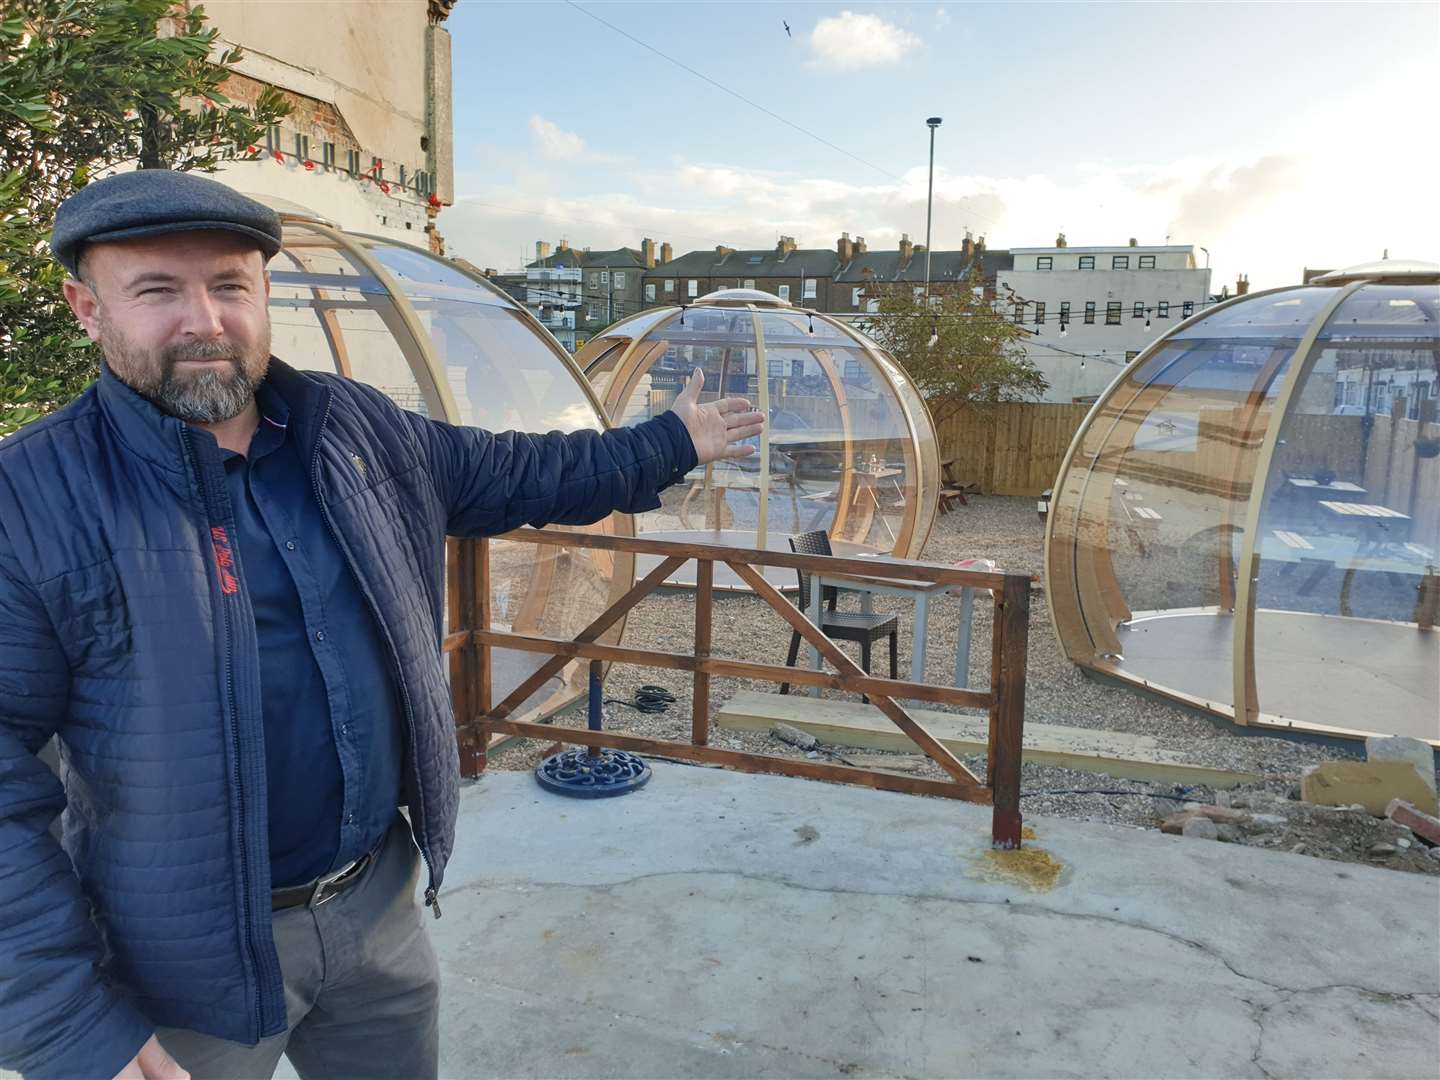 La Turka owner Mehmet Dari unveiling exterior seating bubbles due to launch in Herne Bay